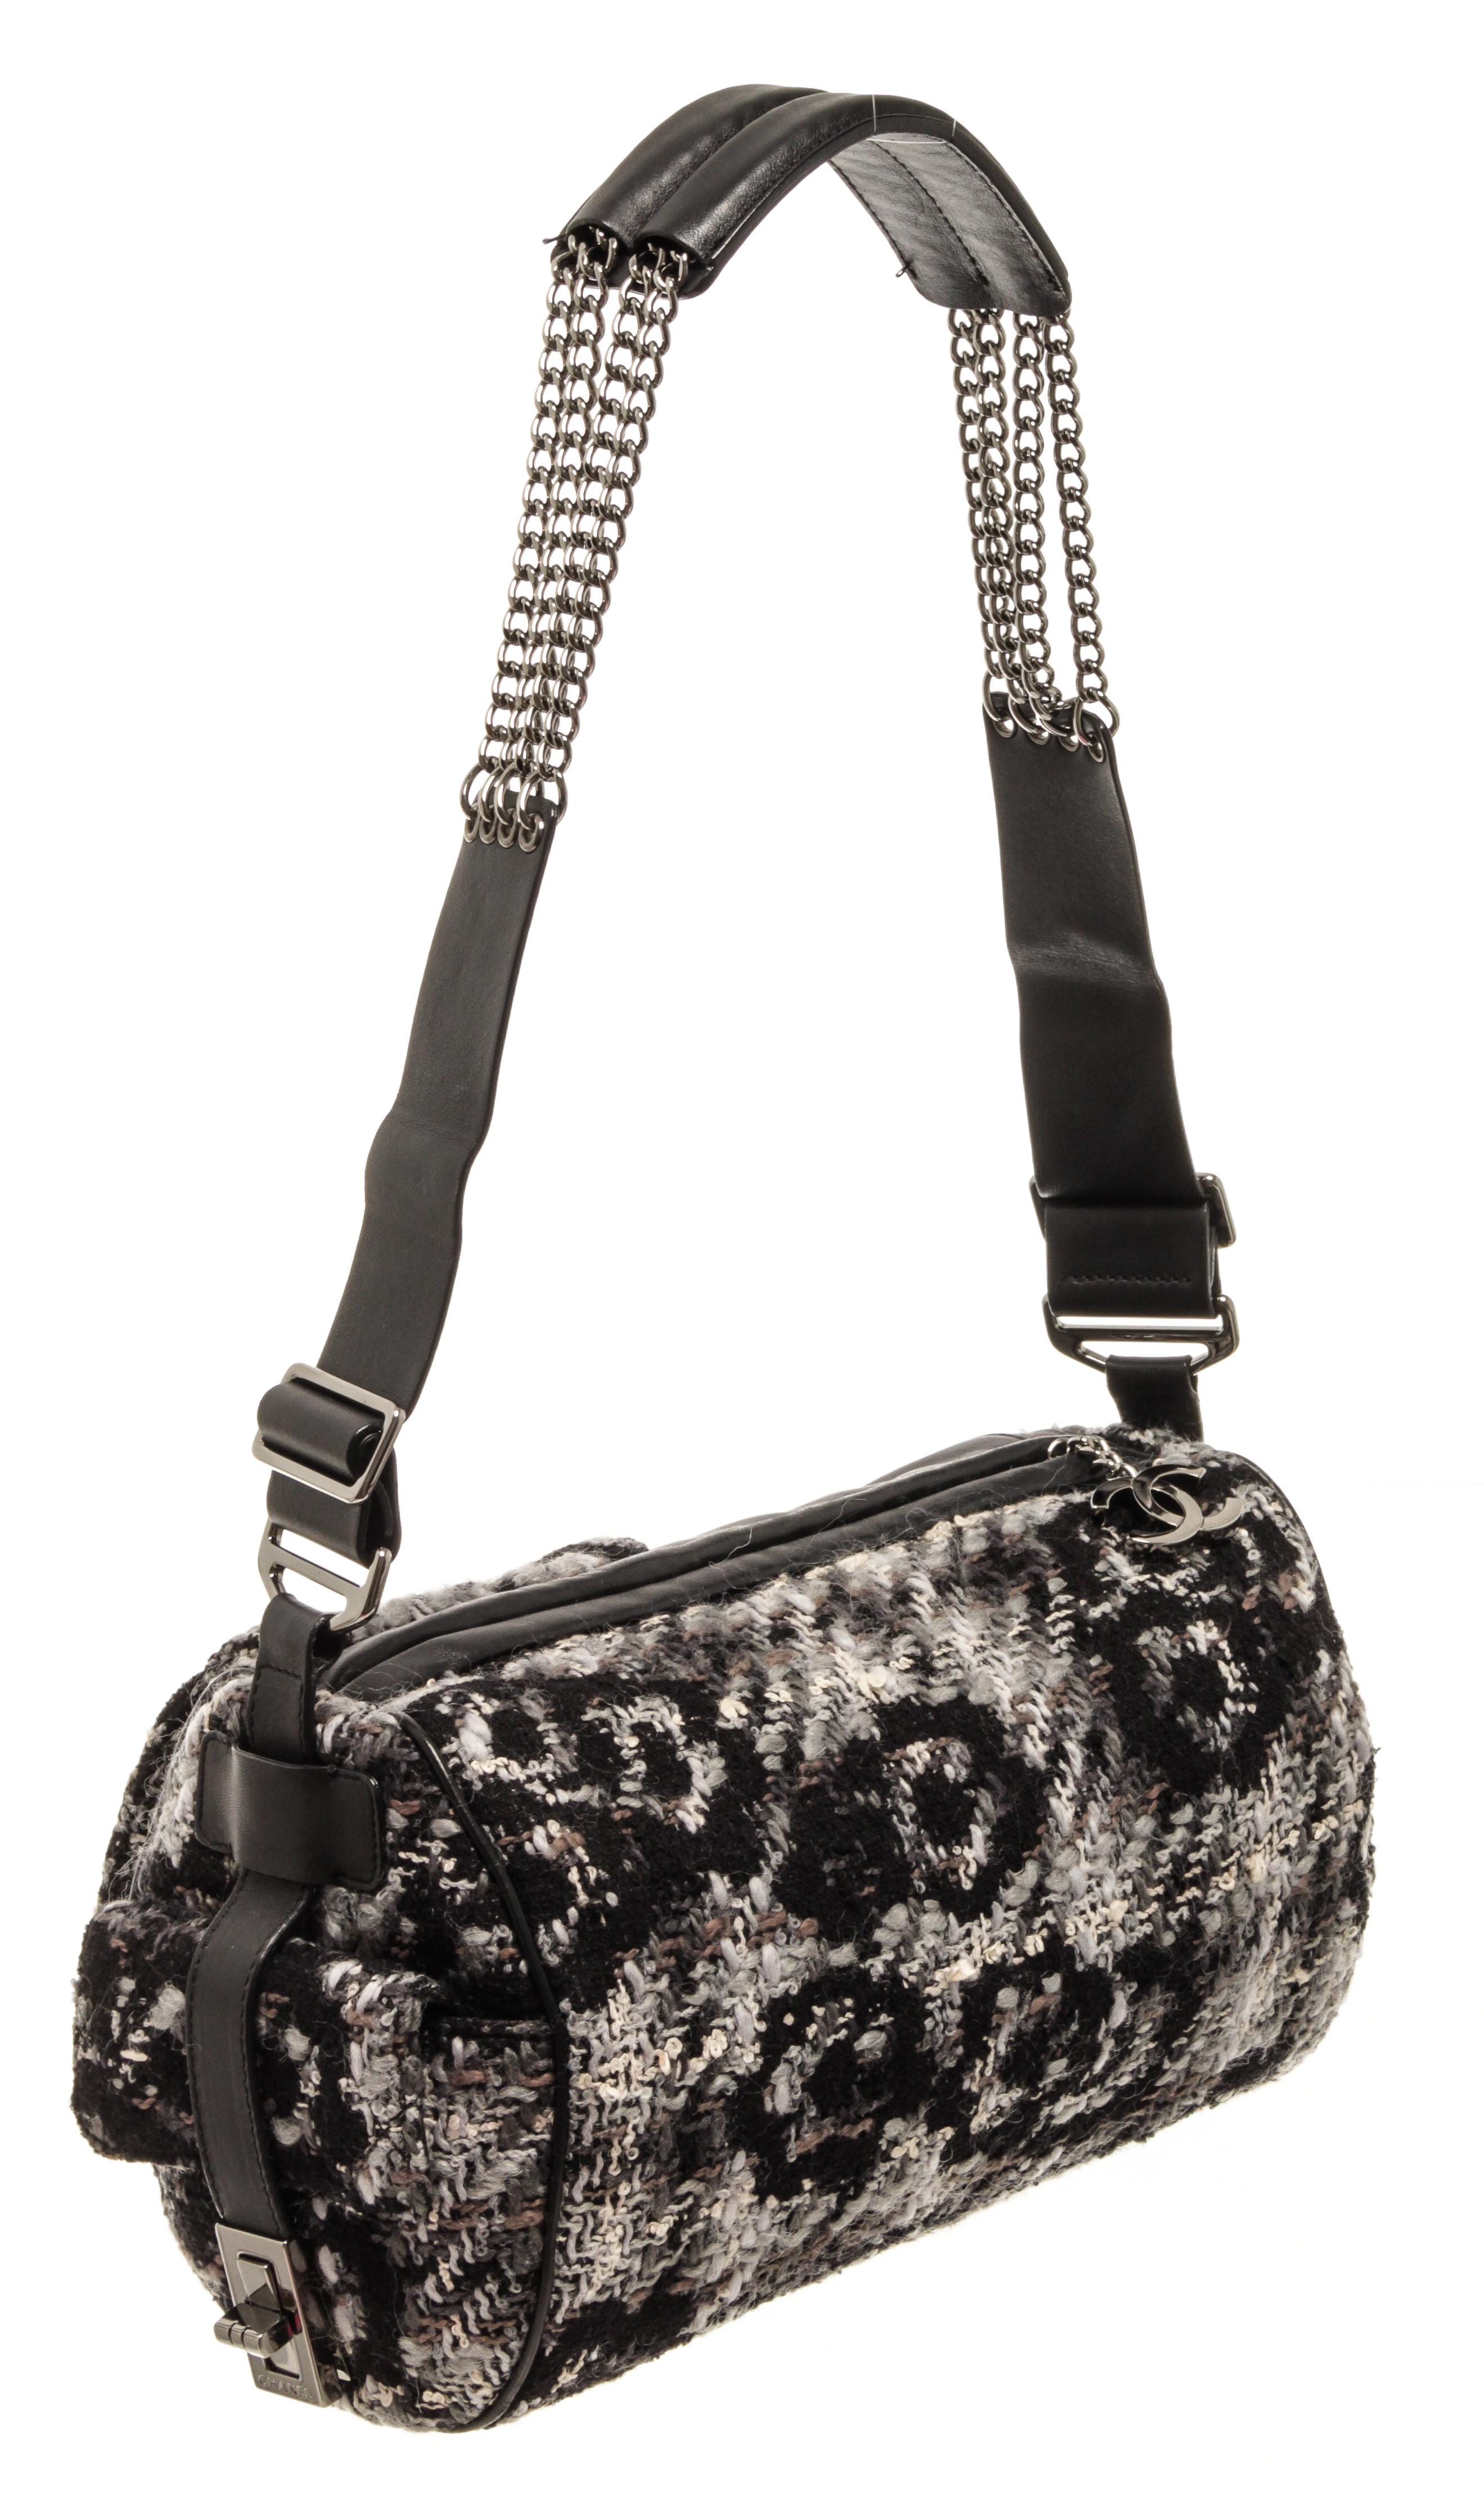 Chanel Black 2.55 Tweed Chain Shoulder Bag In Good Condition For Sale In Irvine, CA